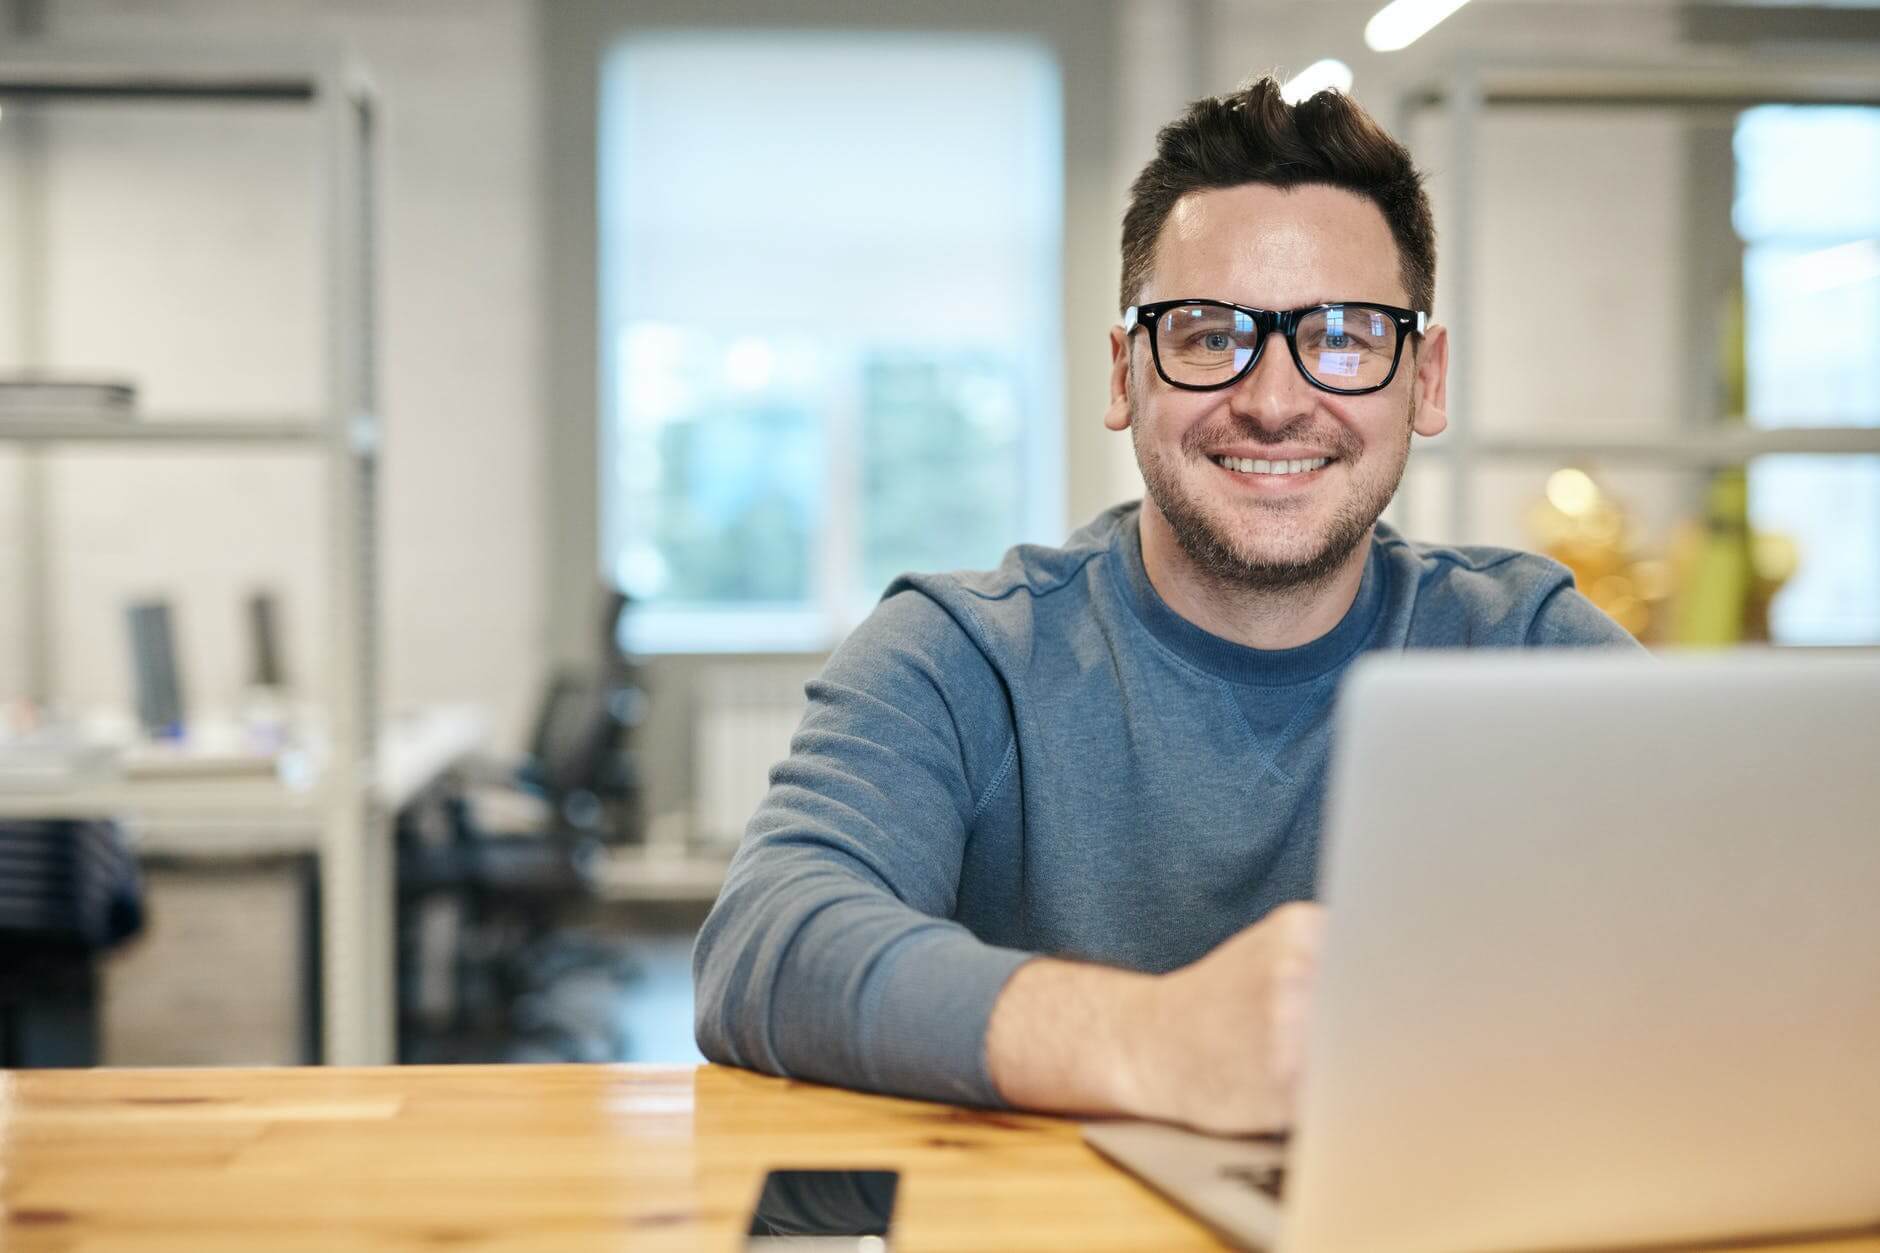 A man smiling in front of the laptop